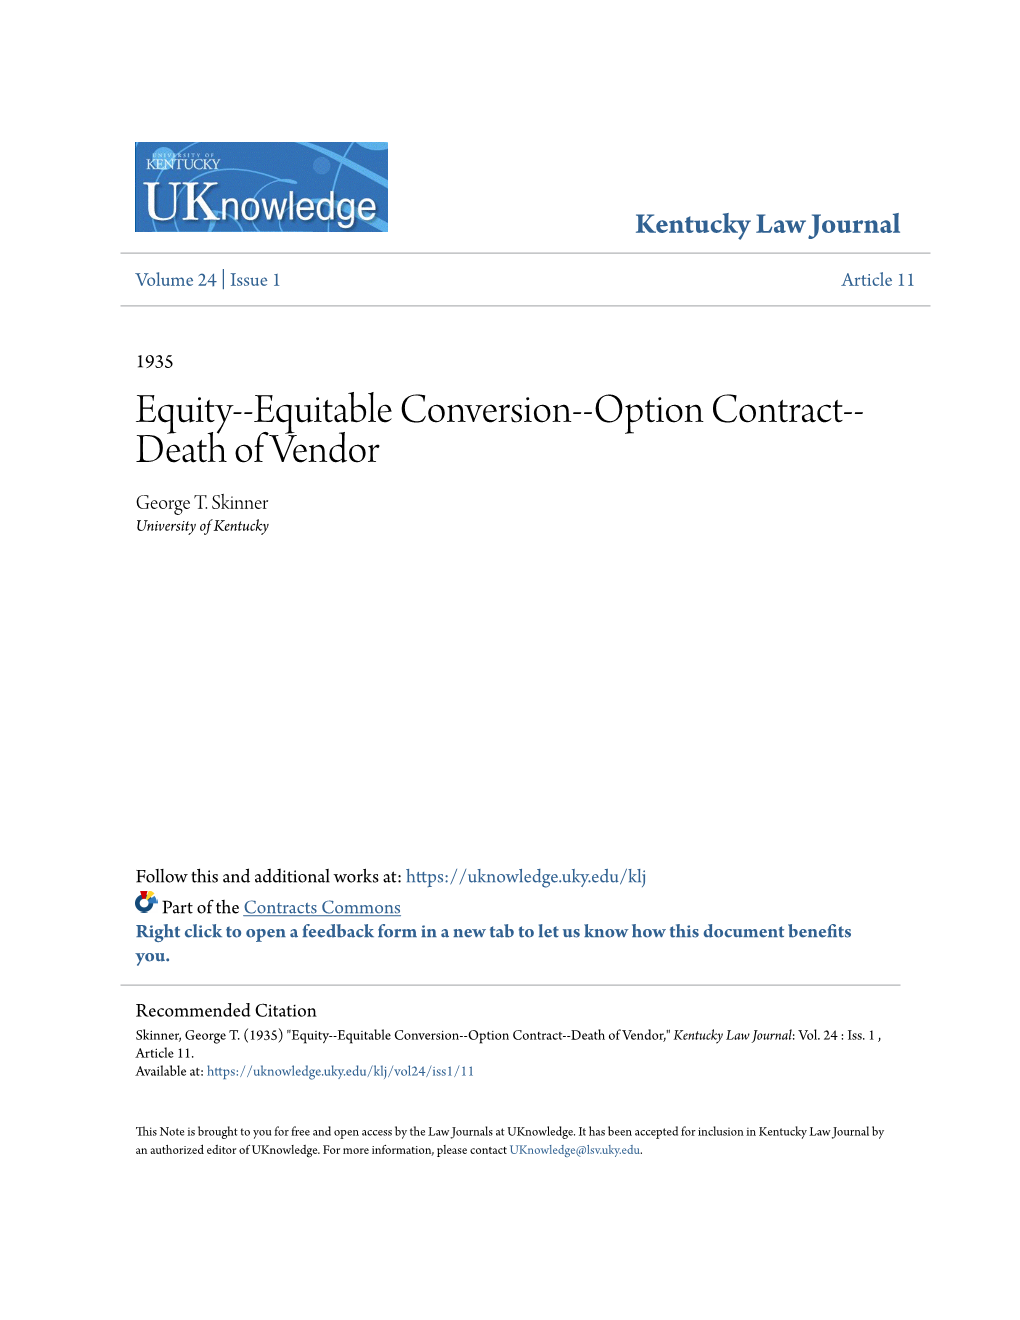 Equity--Equitable Conversion--Option Contract--Death of Vendor," Kentucky Law Journal: Vol